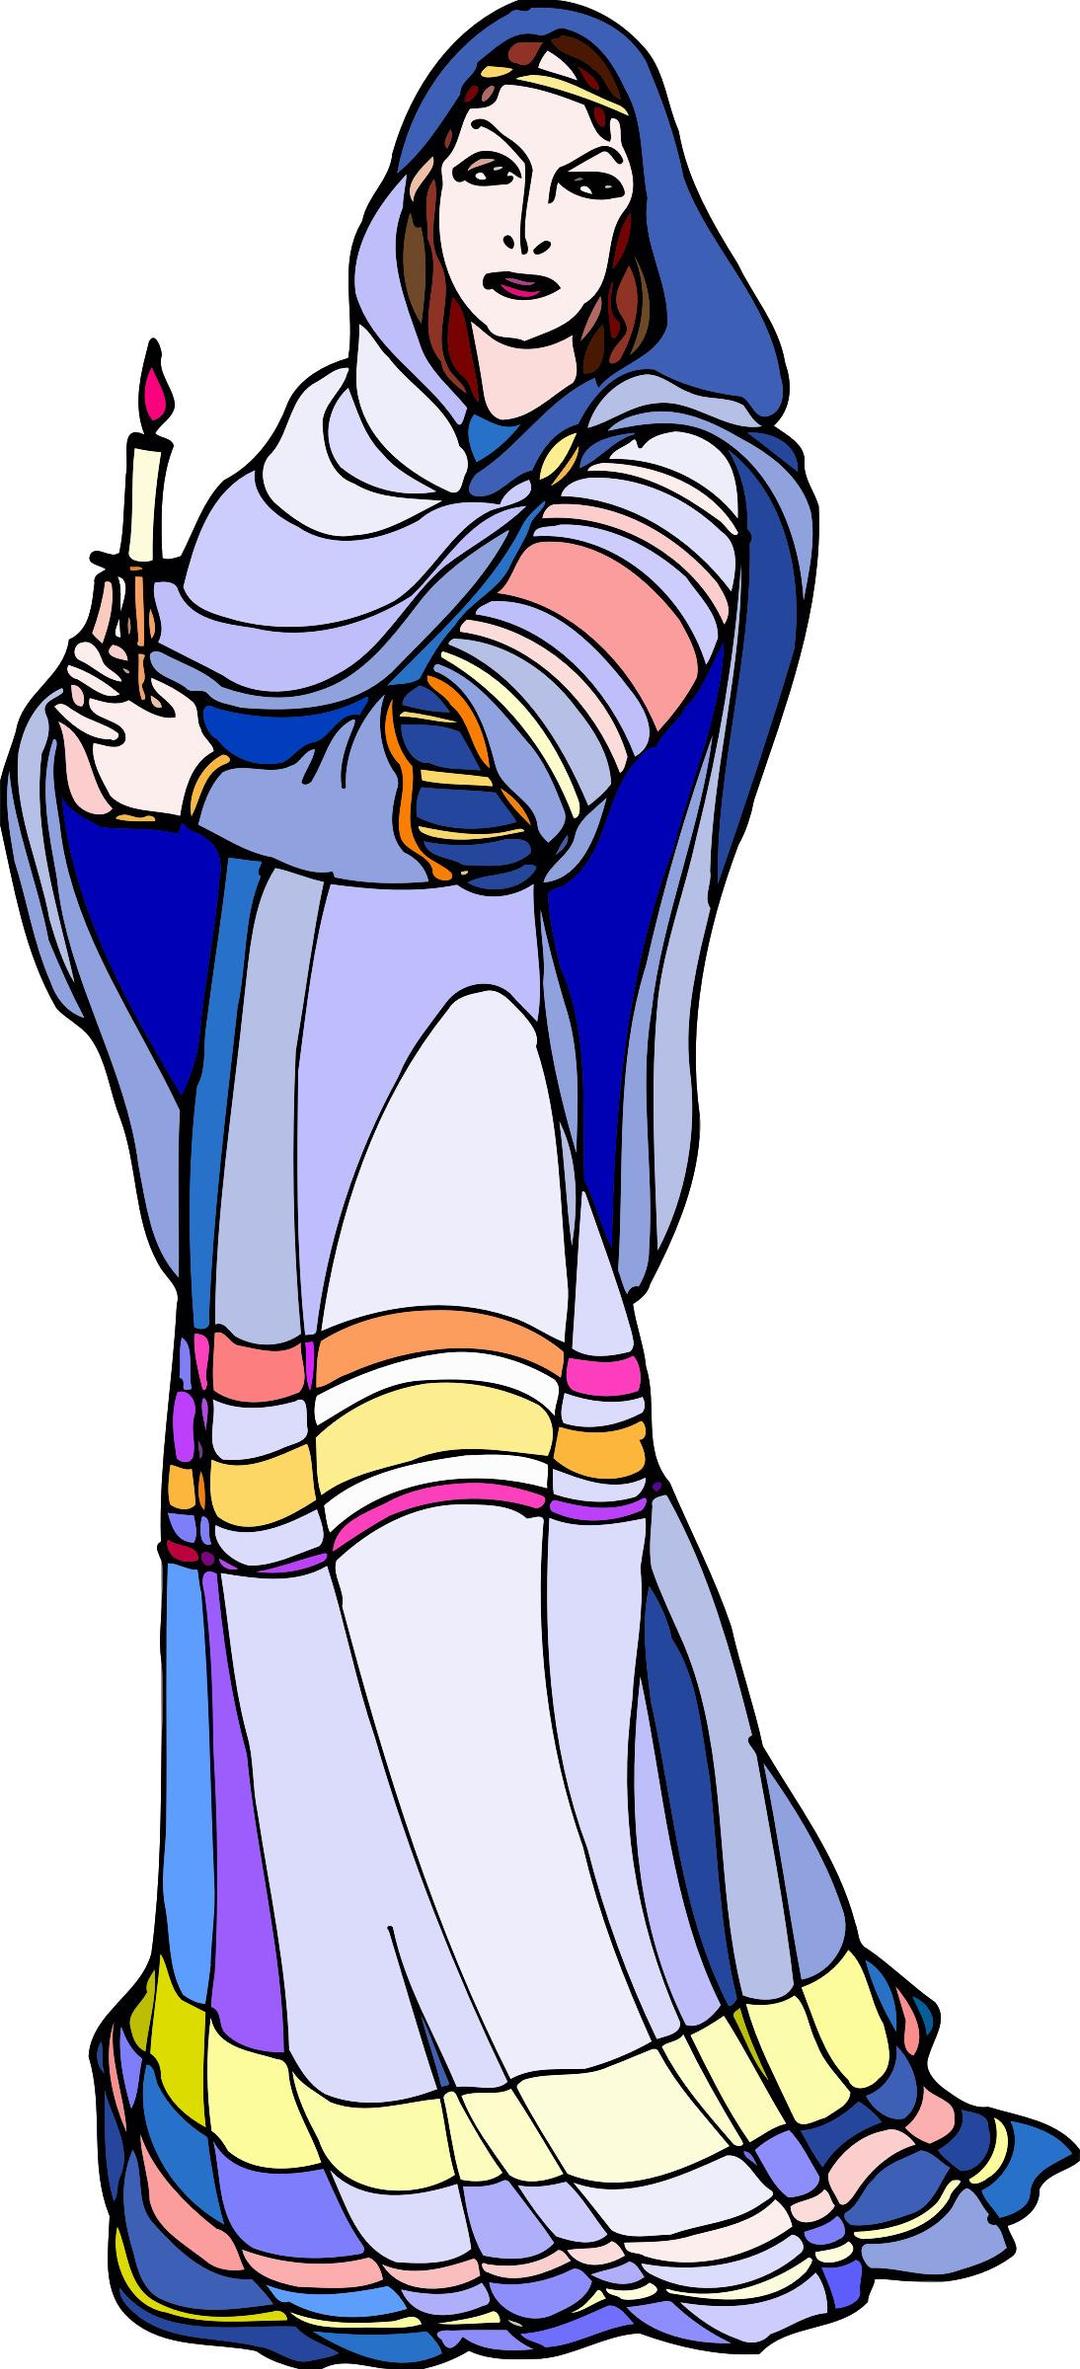 Shakespeare characters - Lady Macbeth (colour) png transparent